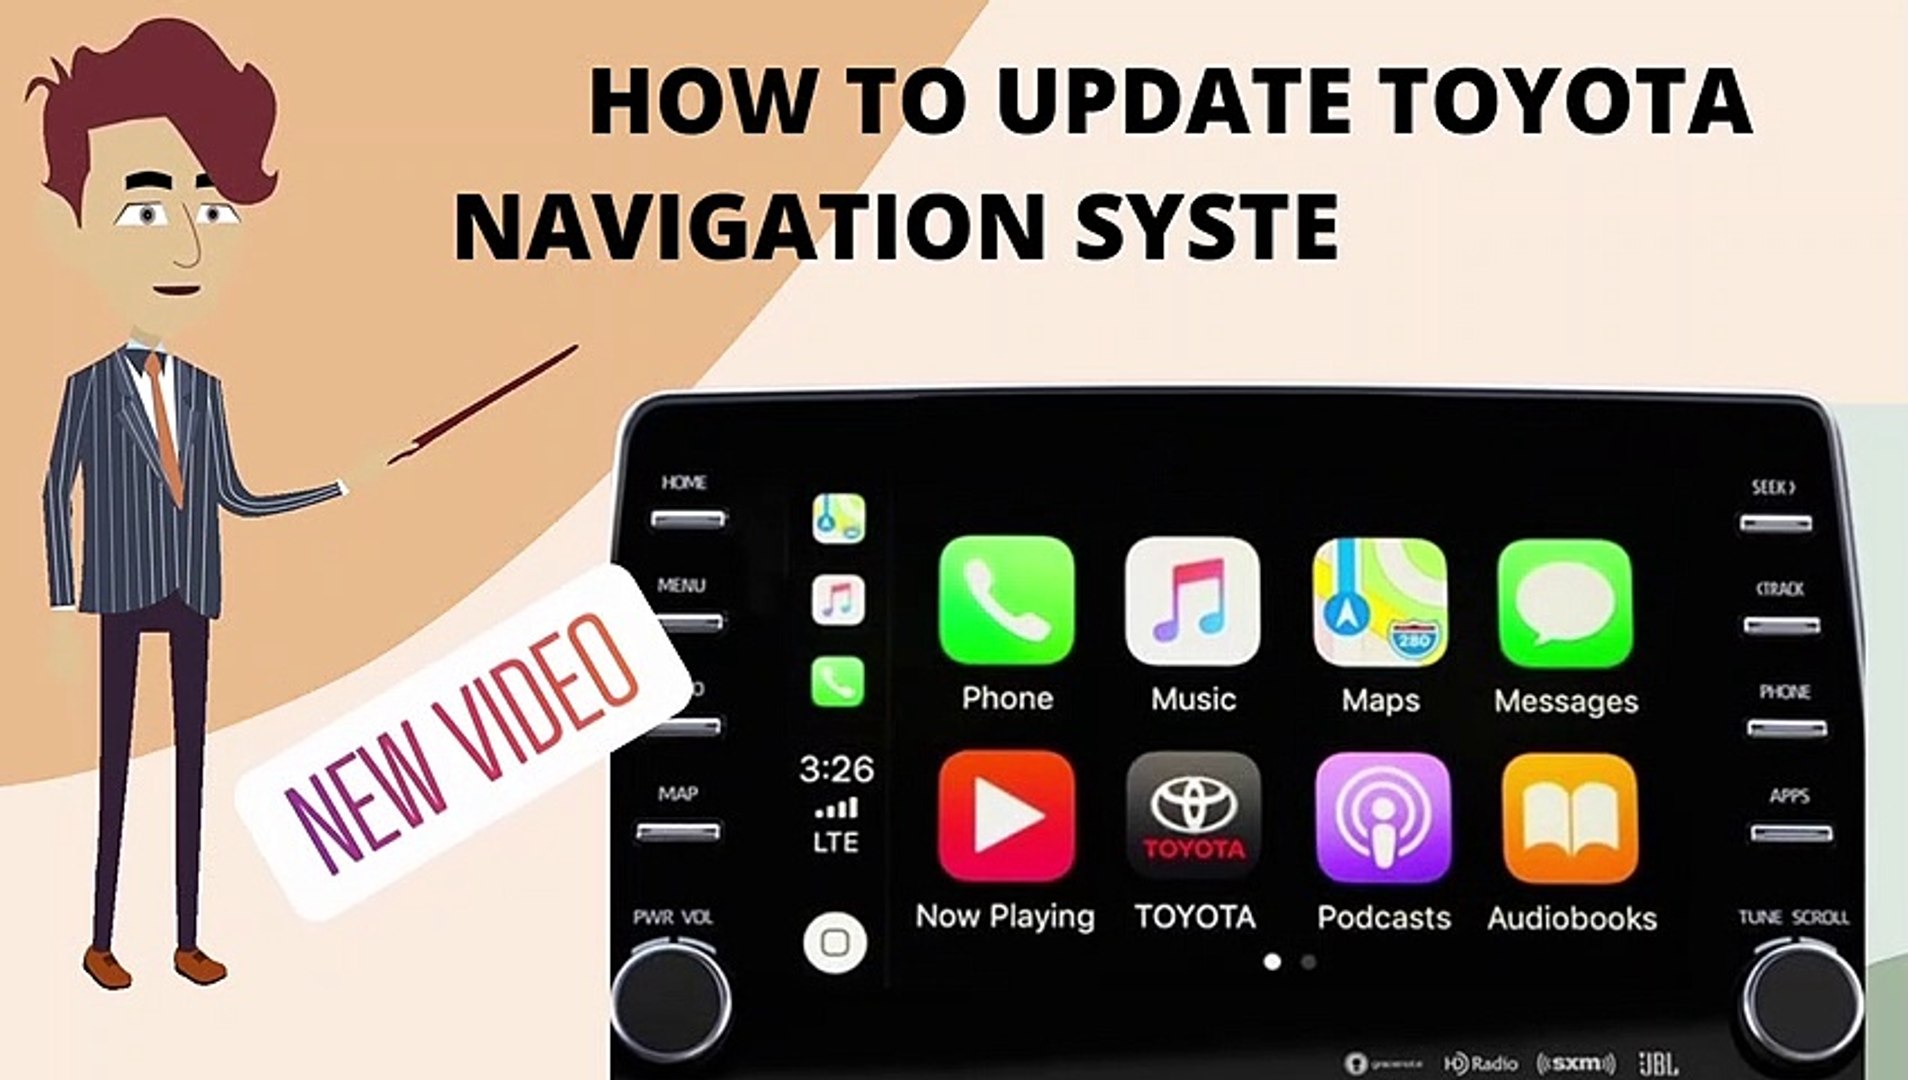 how to update toyota navigation system for free - video Dailymotion